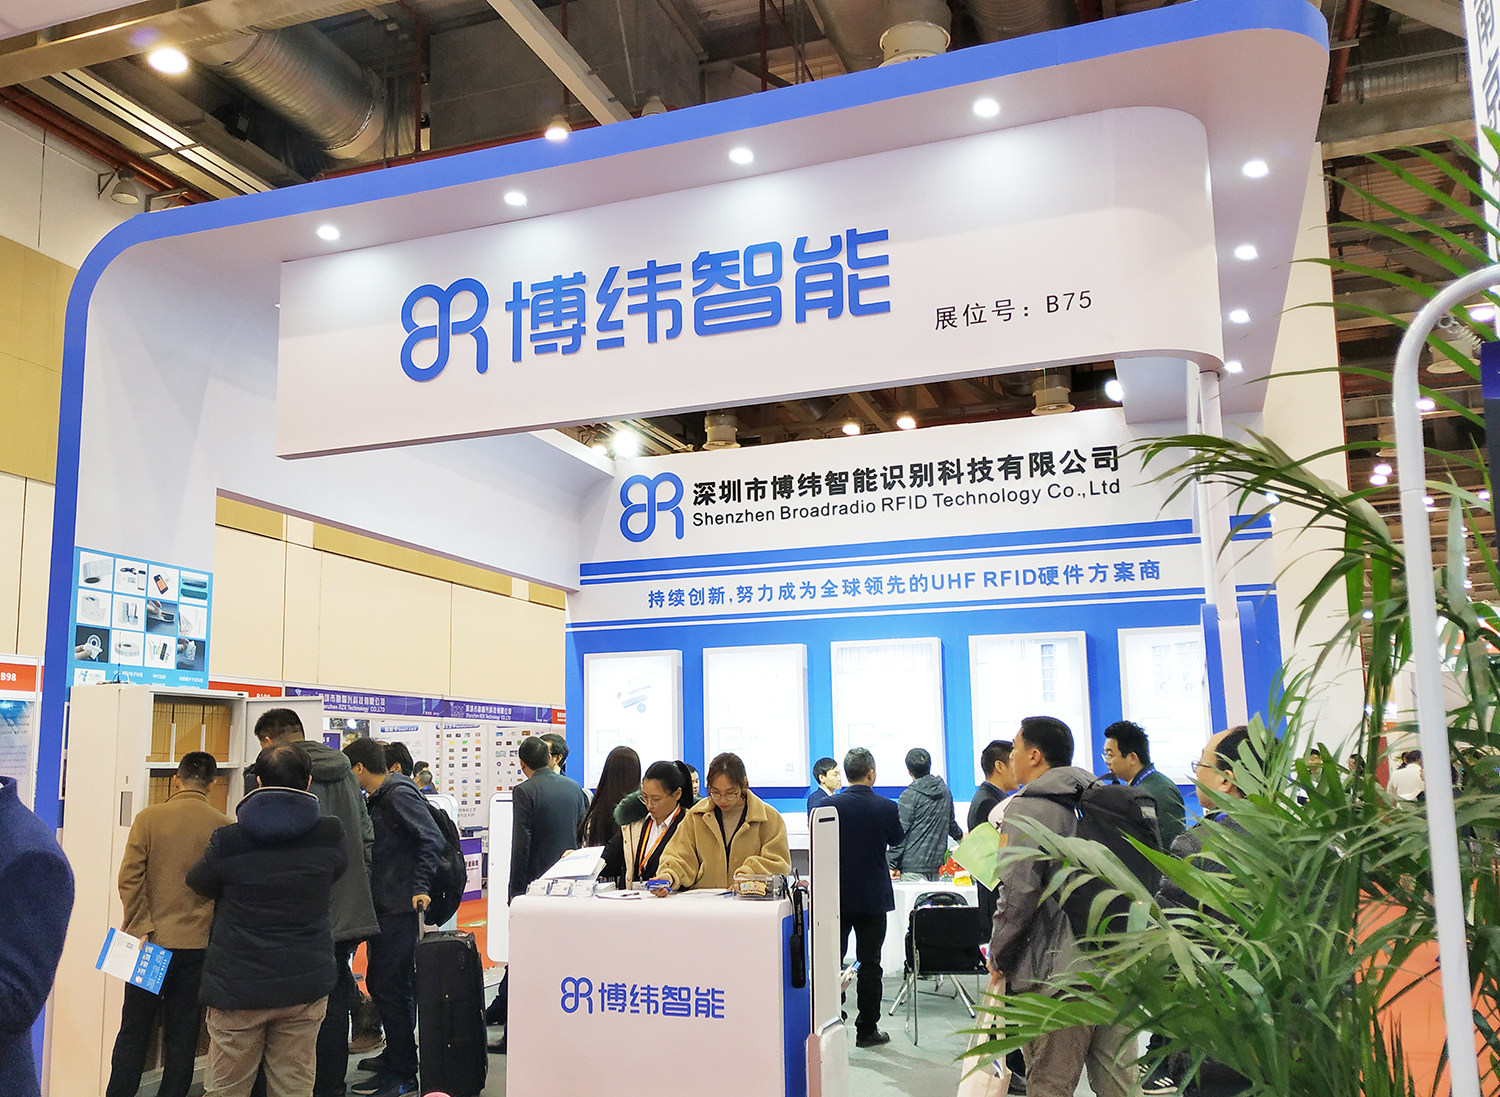 Bowei Smart IOTE 2019 11th Suzhou International Internet of Things Exhibition ended successfully